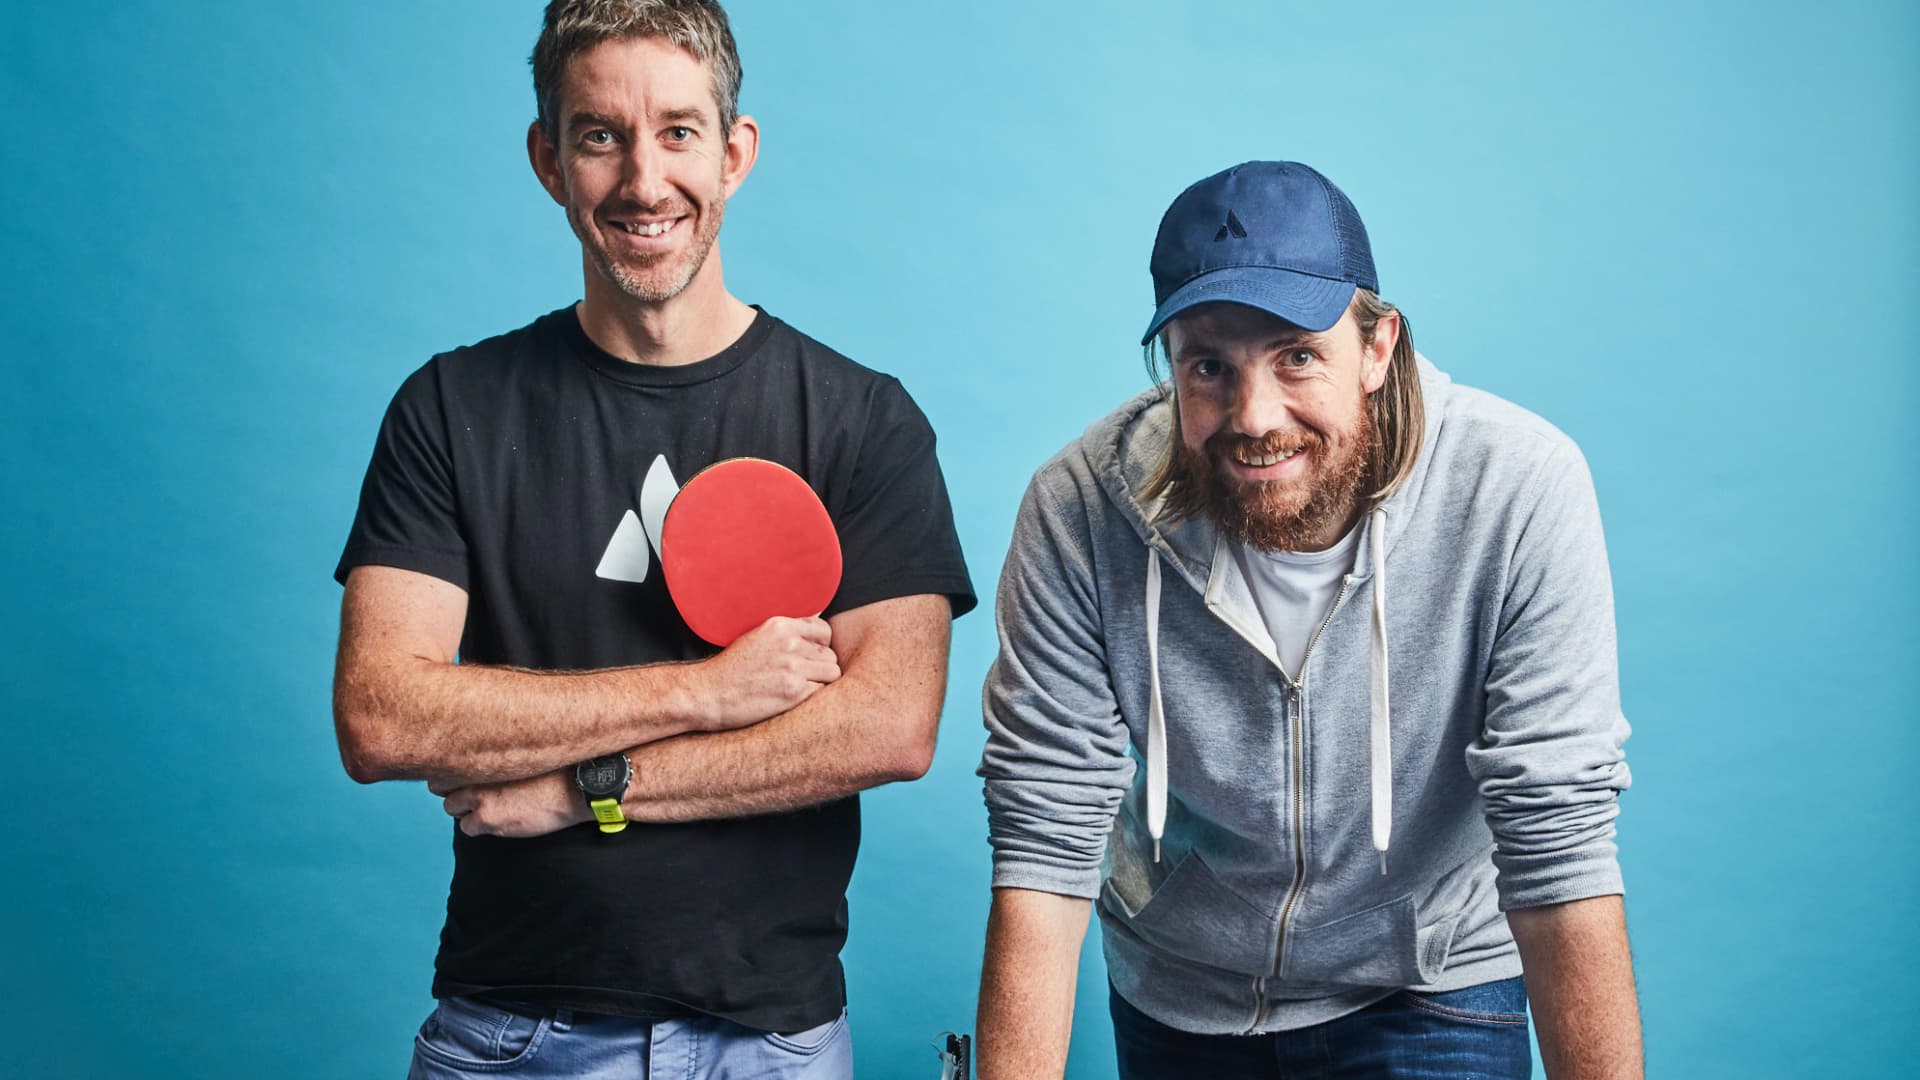 Atlassian's founders and co-CEOs, Scott Farquhar, left, and Mike Cannon-Brookes.